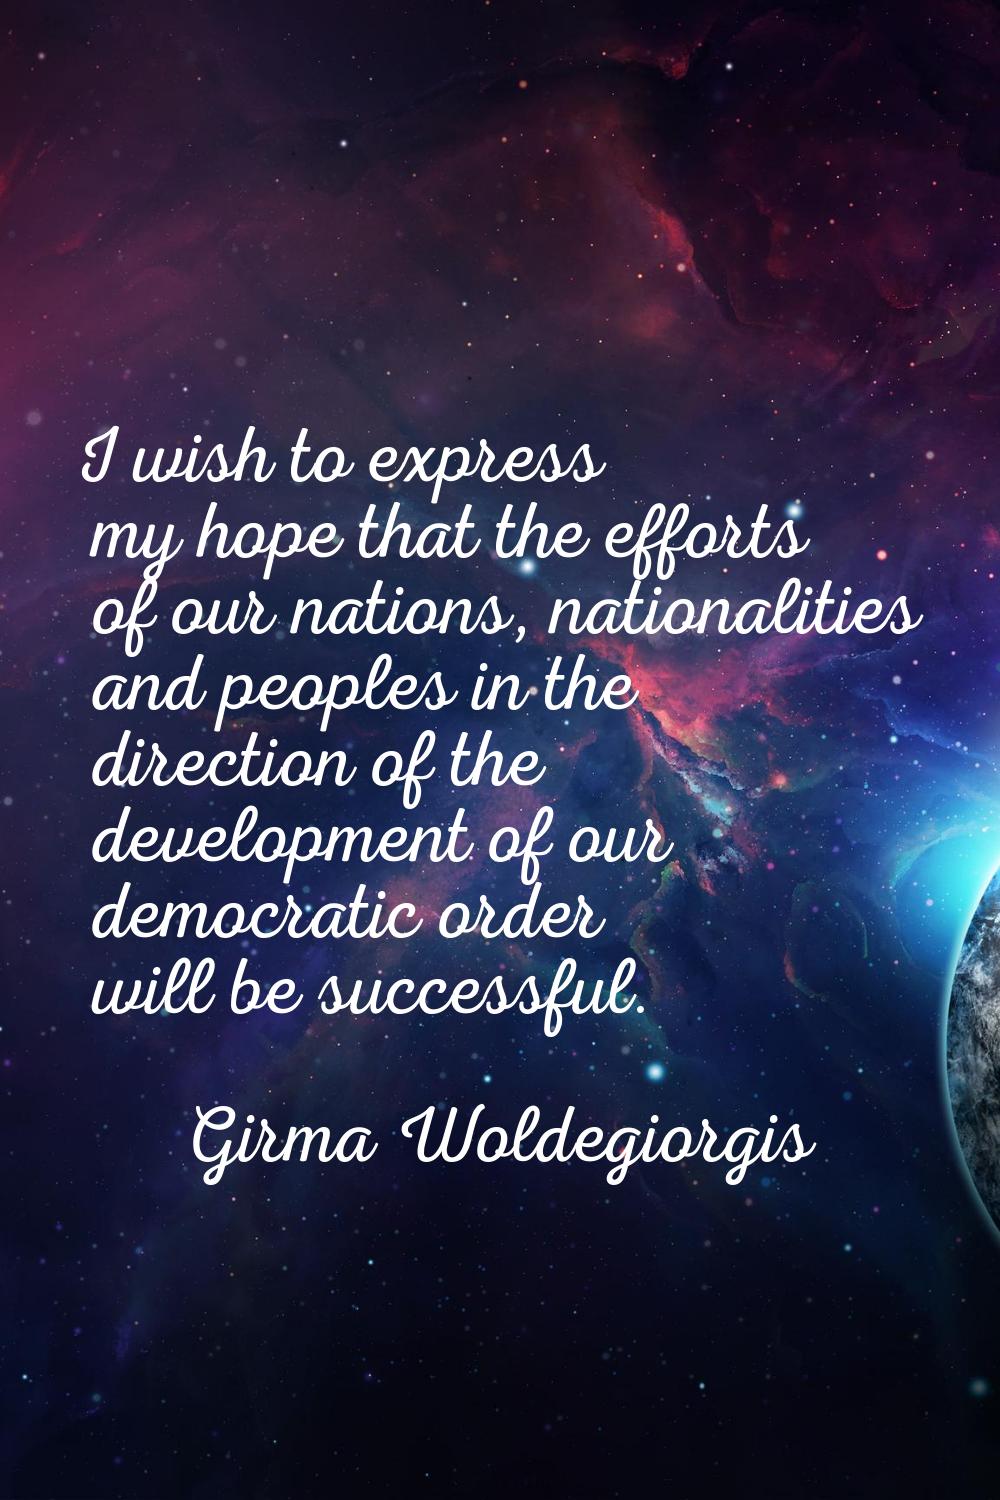 I wish to express my hope that the efforts of our nations, nationalities and peoples in the directi